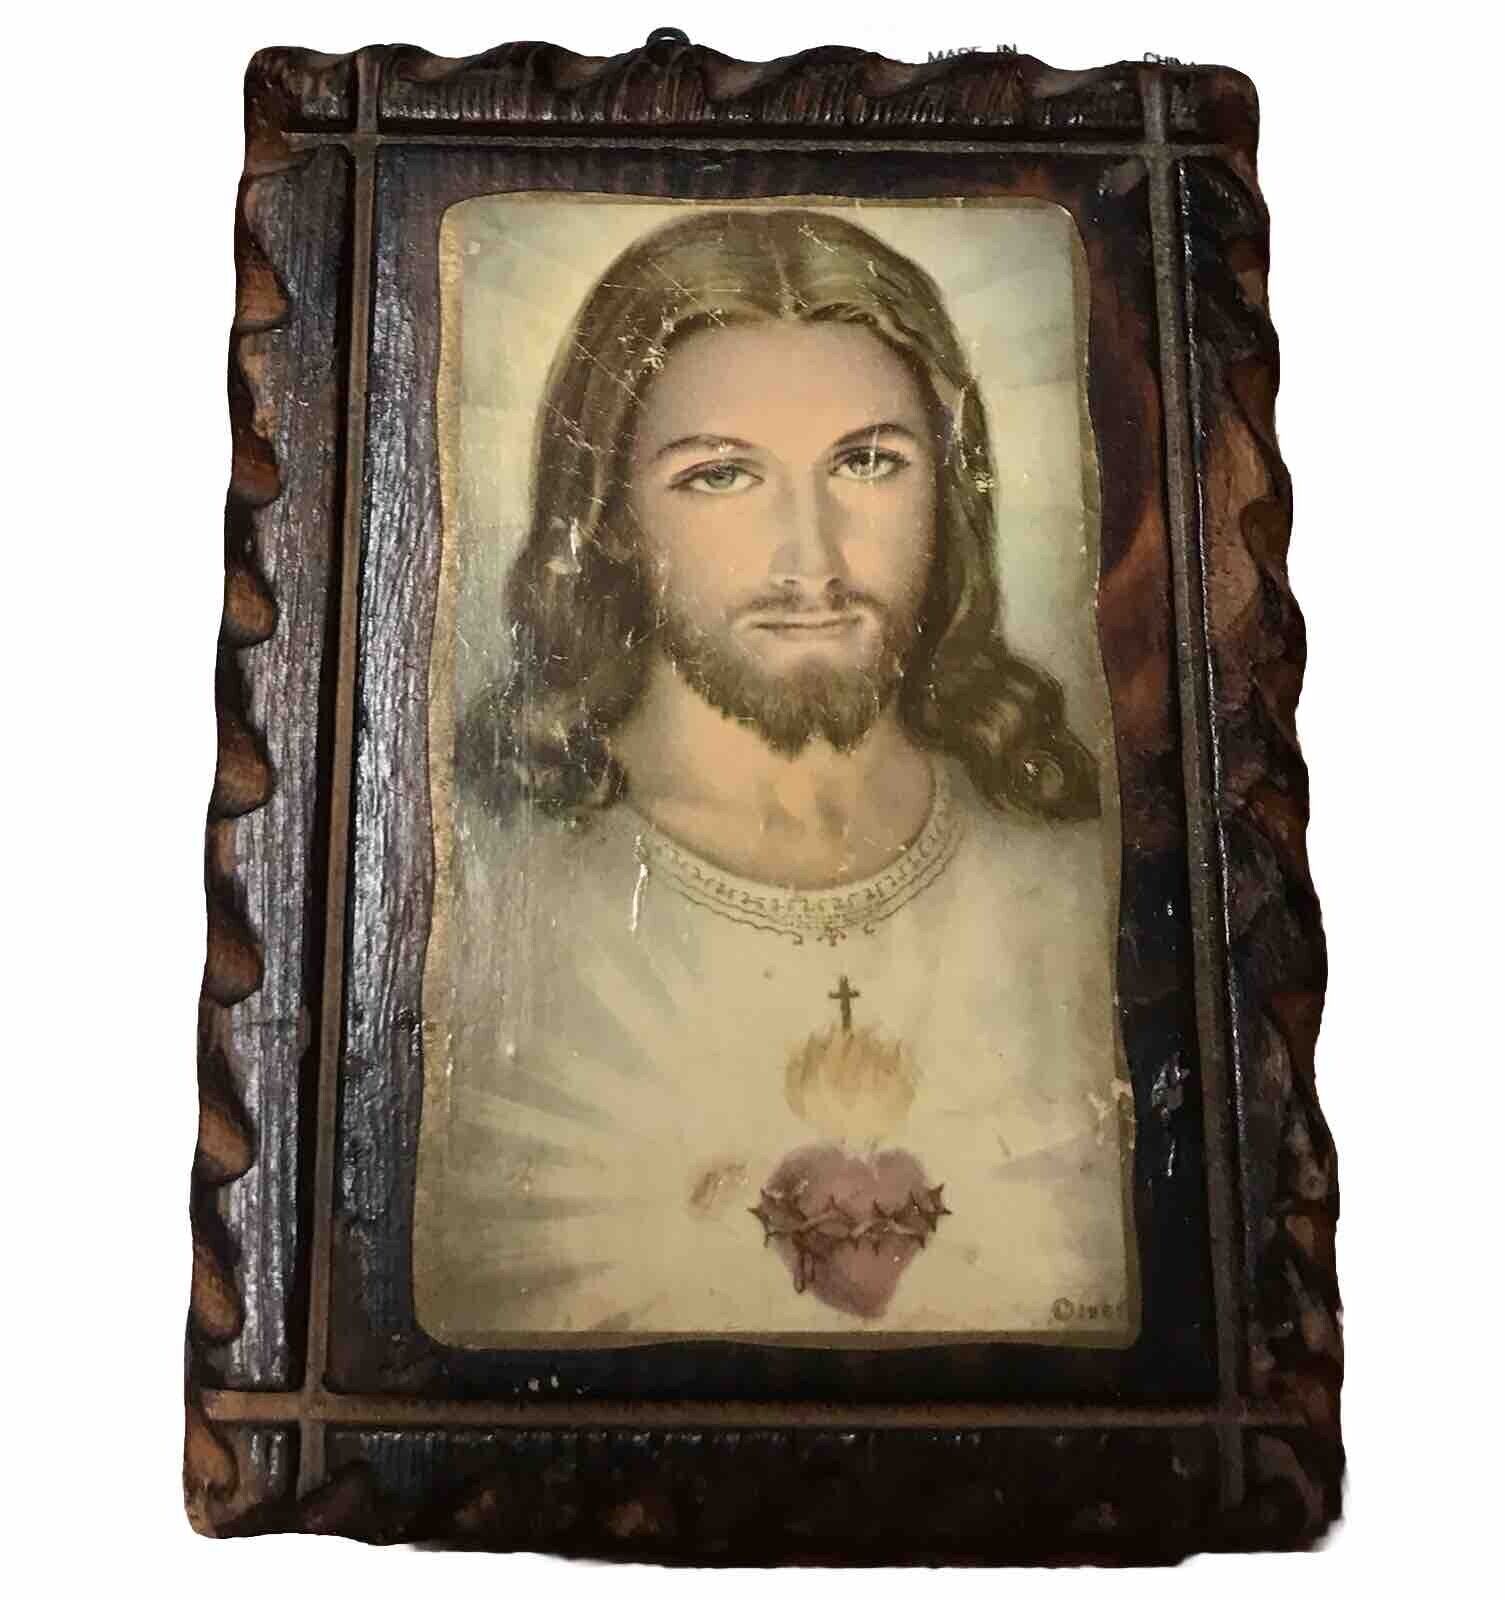 VINTAGE 1961 WOODEN WALL PLAQUE OF OUR LORD JESUS CHRIST HEART  4x6 Inch